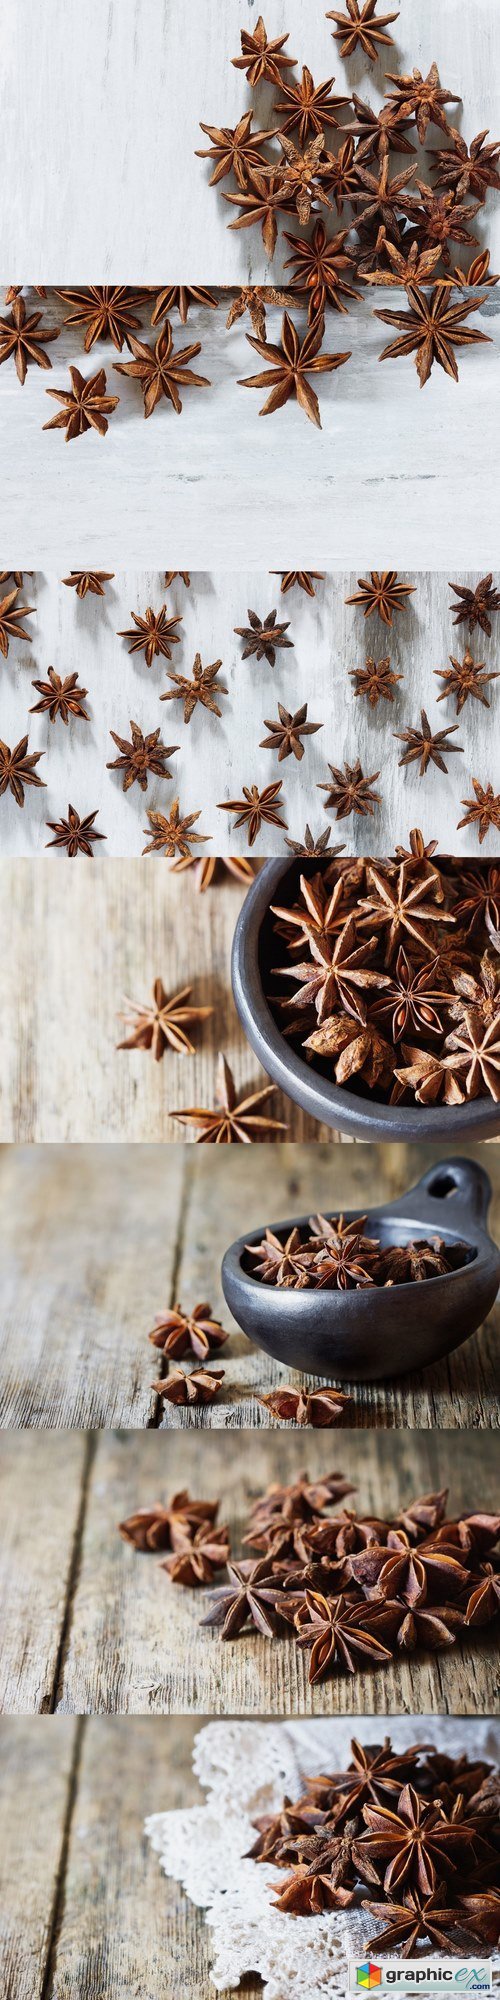 Star anise spice and fruit seeds